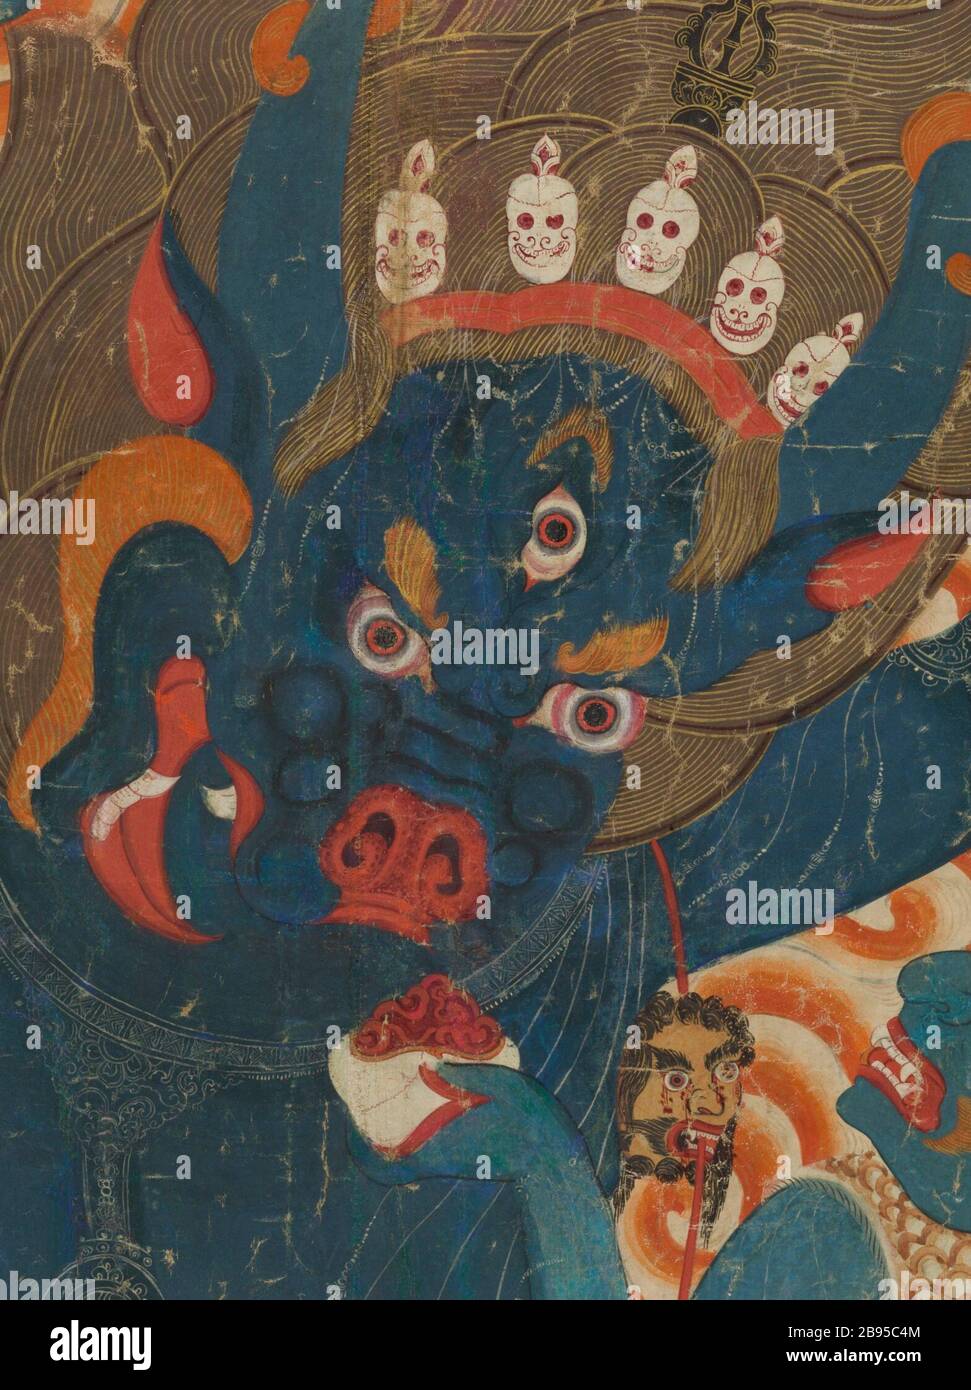 'Yama and Yami (image 13 of 21); English:  Eastern Tibet, Kham region, circa 1675-1725 Paintings Mineral pigments and gold on cotton cloth Image: 94 1/2 x 58 1/4 in. (240.03 x 147.96 cm); Overall (with former mount): 317.5 x 212.09 cm. (125 x 83 1/2 in) Gift of Mr. and Mrs. Jack Zimmerman (M.71.78) South and Southeast Asian Art; between circa 1675 and circa 1725 date QS:P571,+1500-00-00T00:00:00Z/6,P1319,+1675-00-00T00:00:00Z/9,P1326,+1725-00-00T00:00:00Z/9,P1480,Q5727902; ' Stock Photo